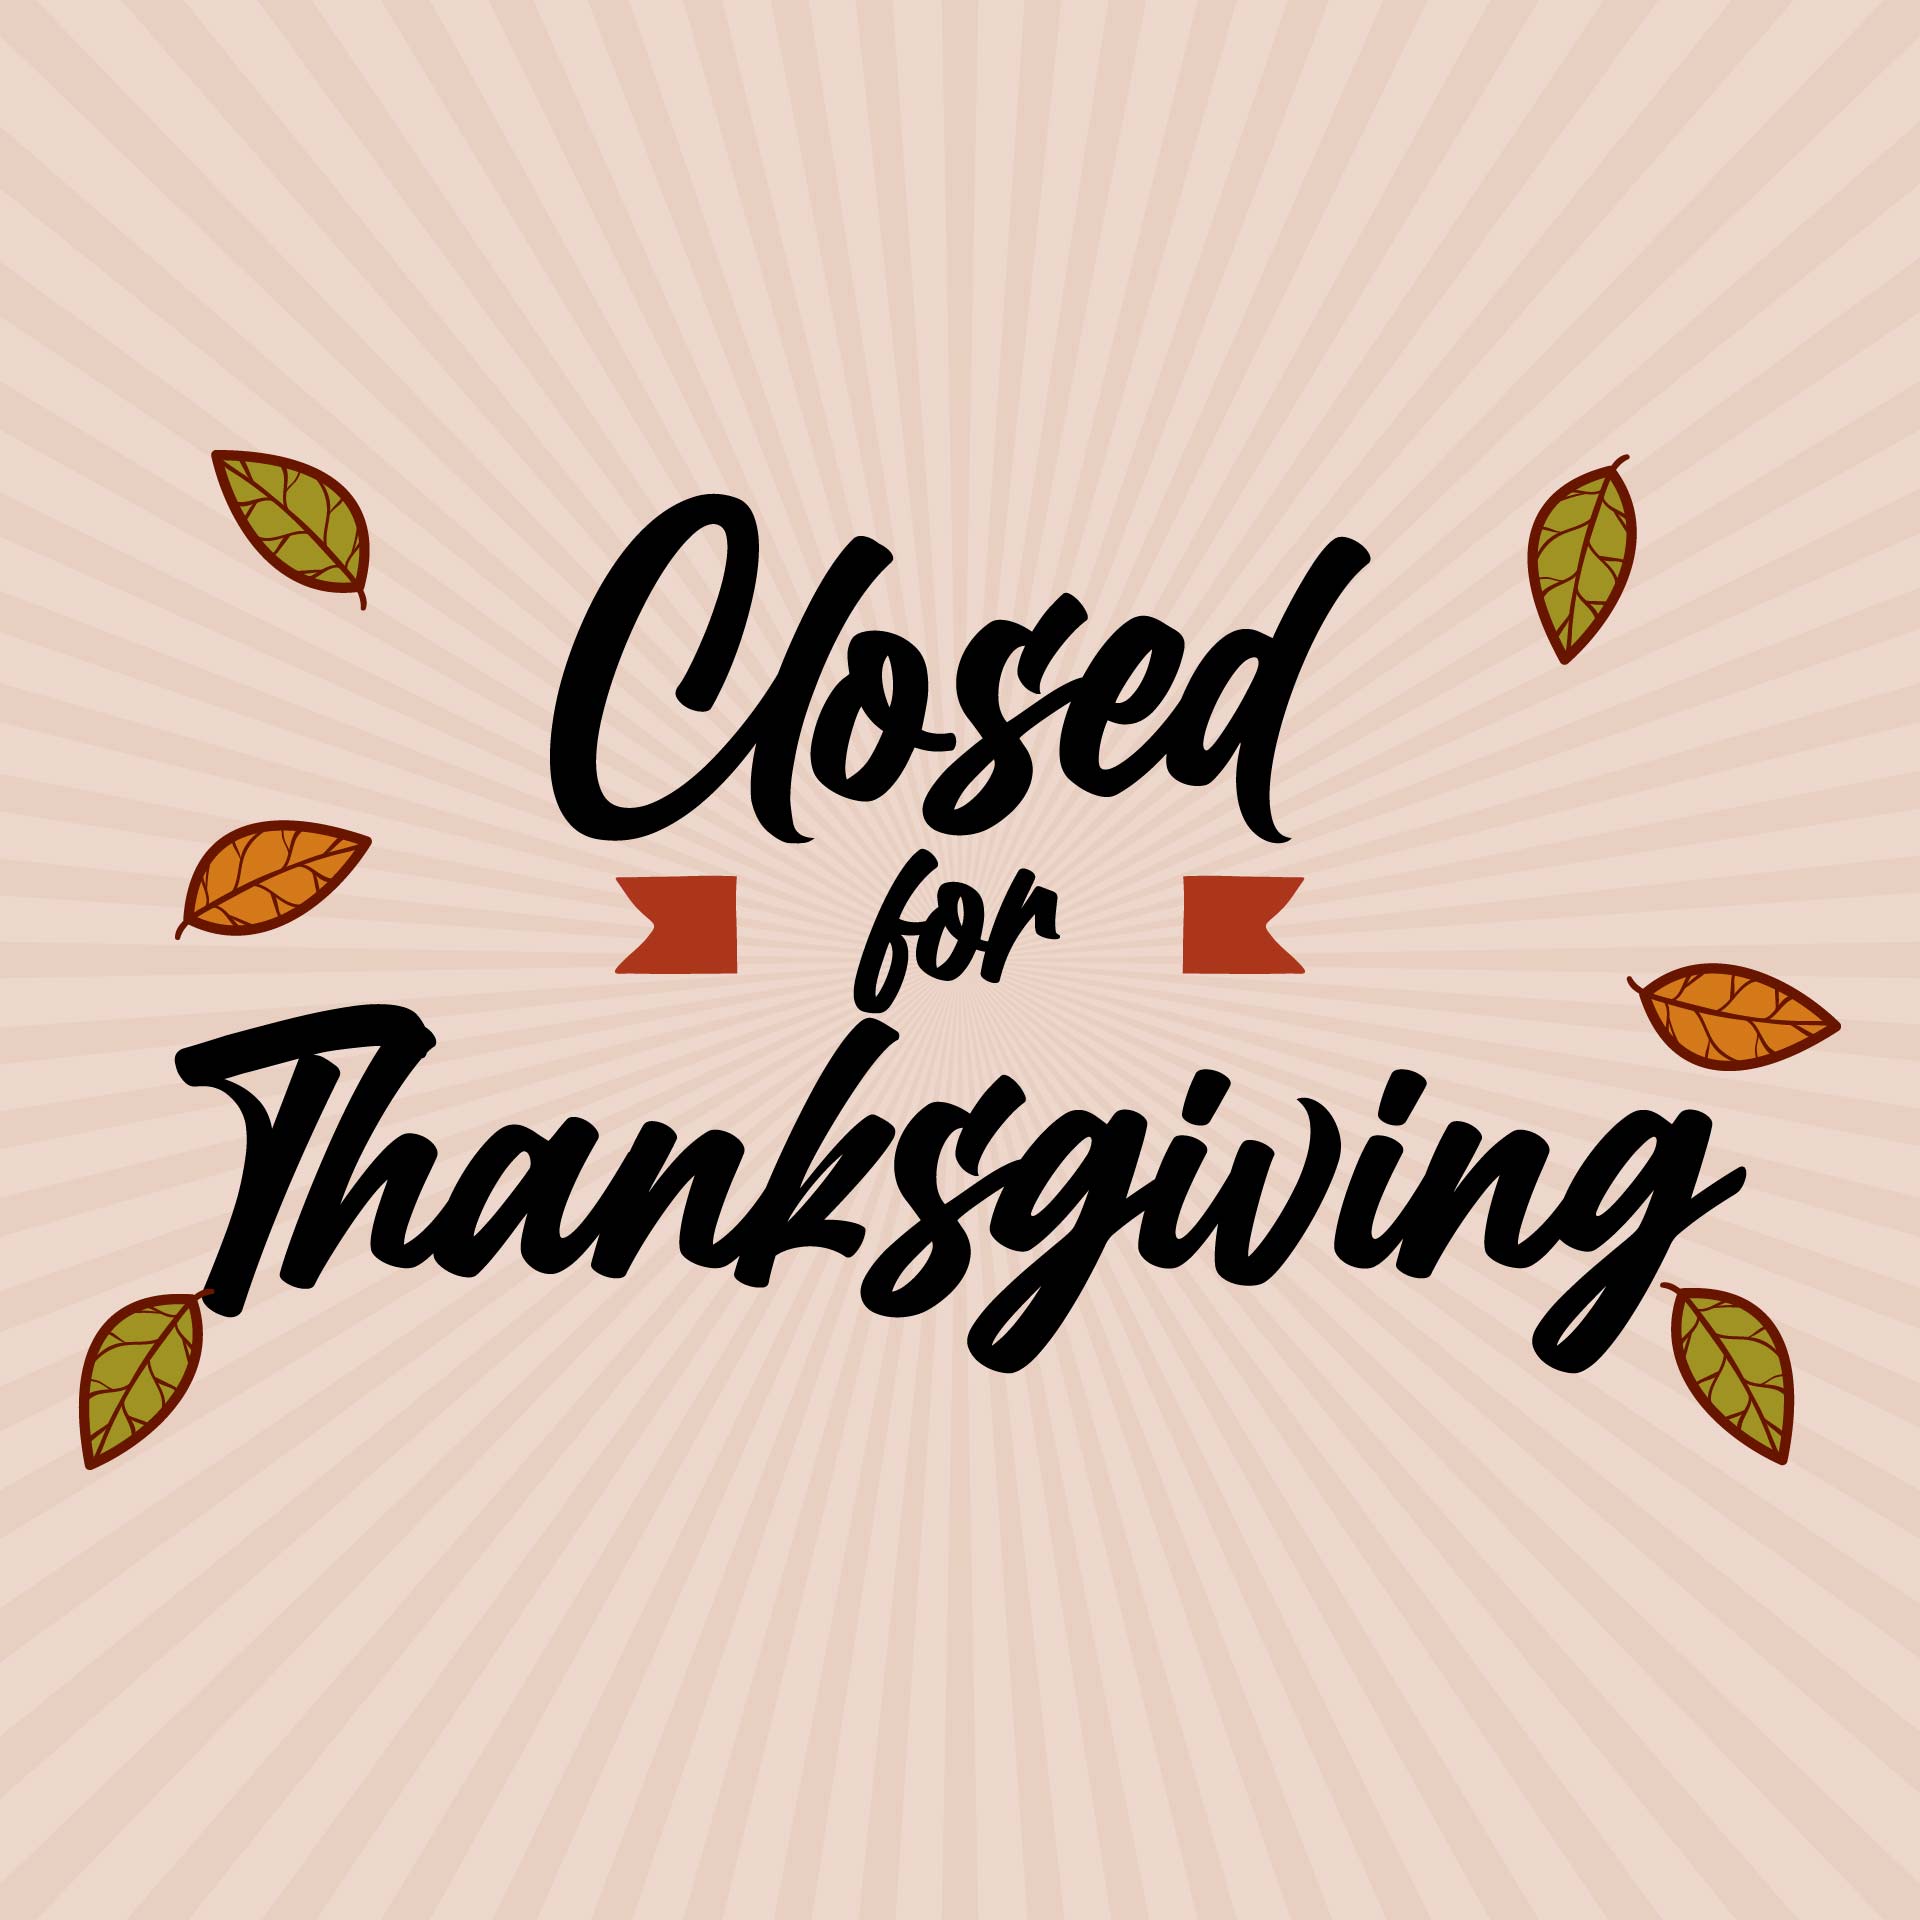 10 Best Closed For Thanksgiving Printables PDF for Free at Printablee